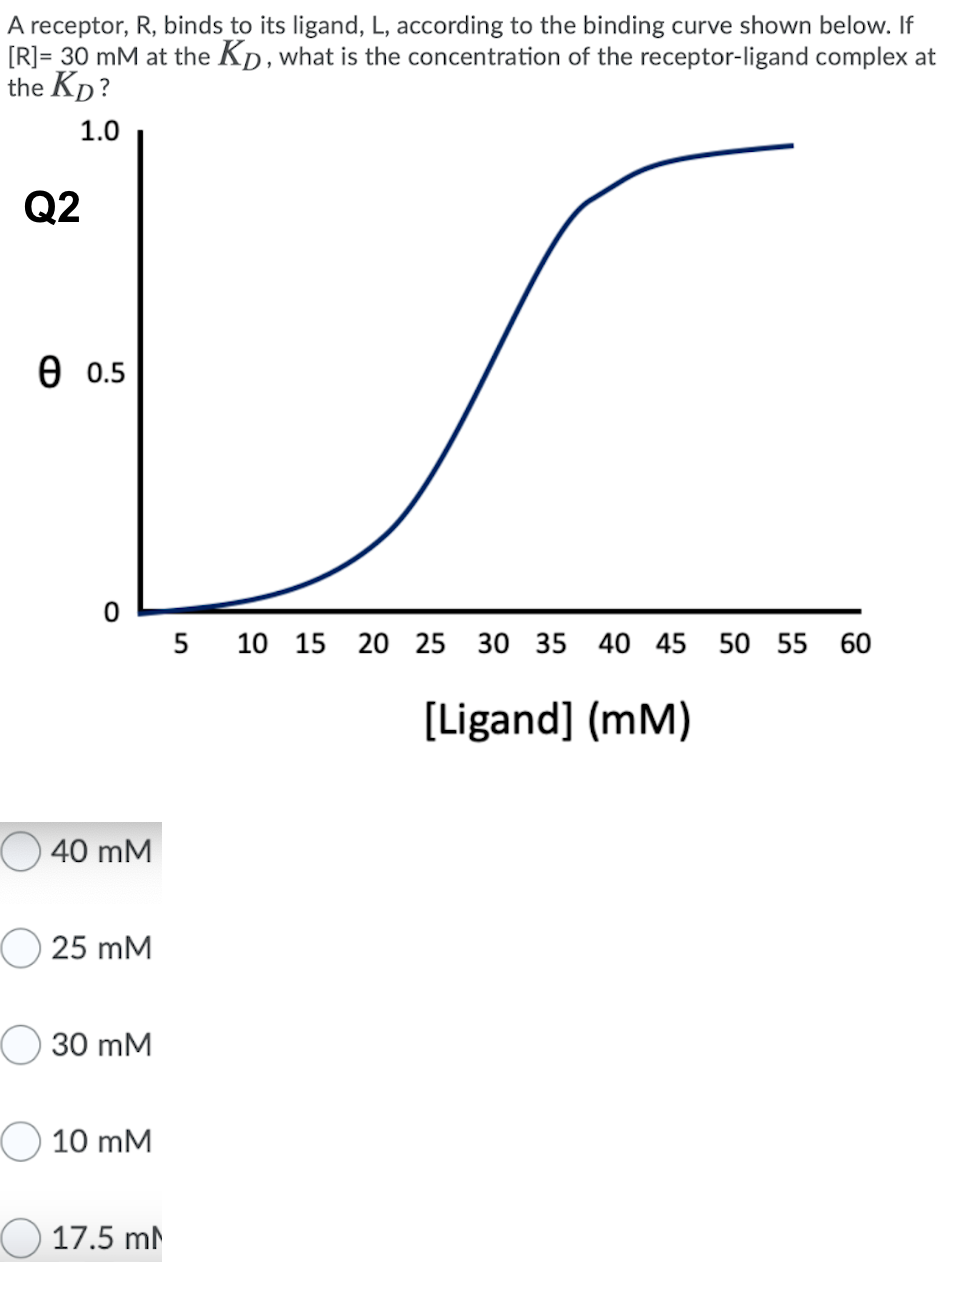 A receptor, R, binds to its ligand, L, according to the binding curve shown below. If
[R]= 30 mM at the KD, what is the concentration of the receptor-ligand complex at
the KD?
1.0
Q2
10 15 20 25
30 35 40 45 50 55 60
0 0.5
40 mM
O 25 mM
O 30 mM
O 10 mM
17.5 ml
5
[Ligand] (mm)